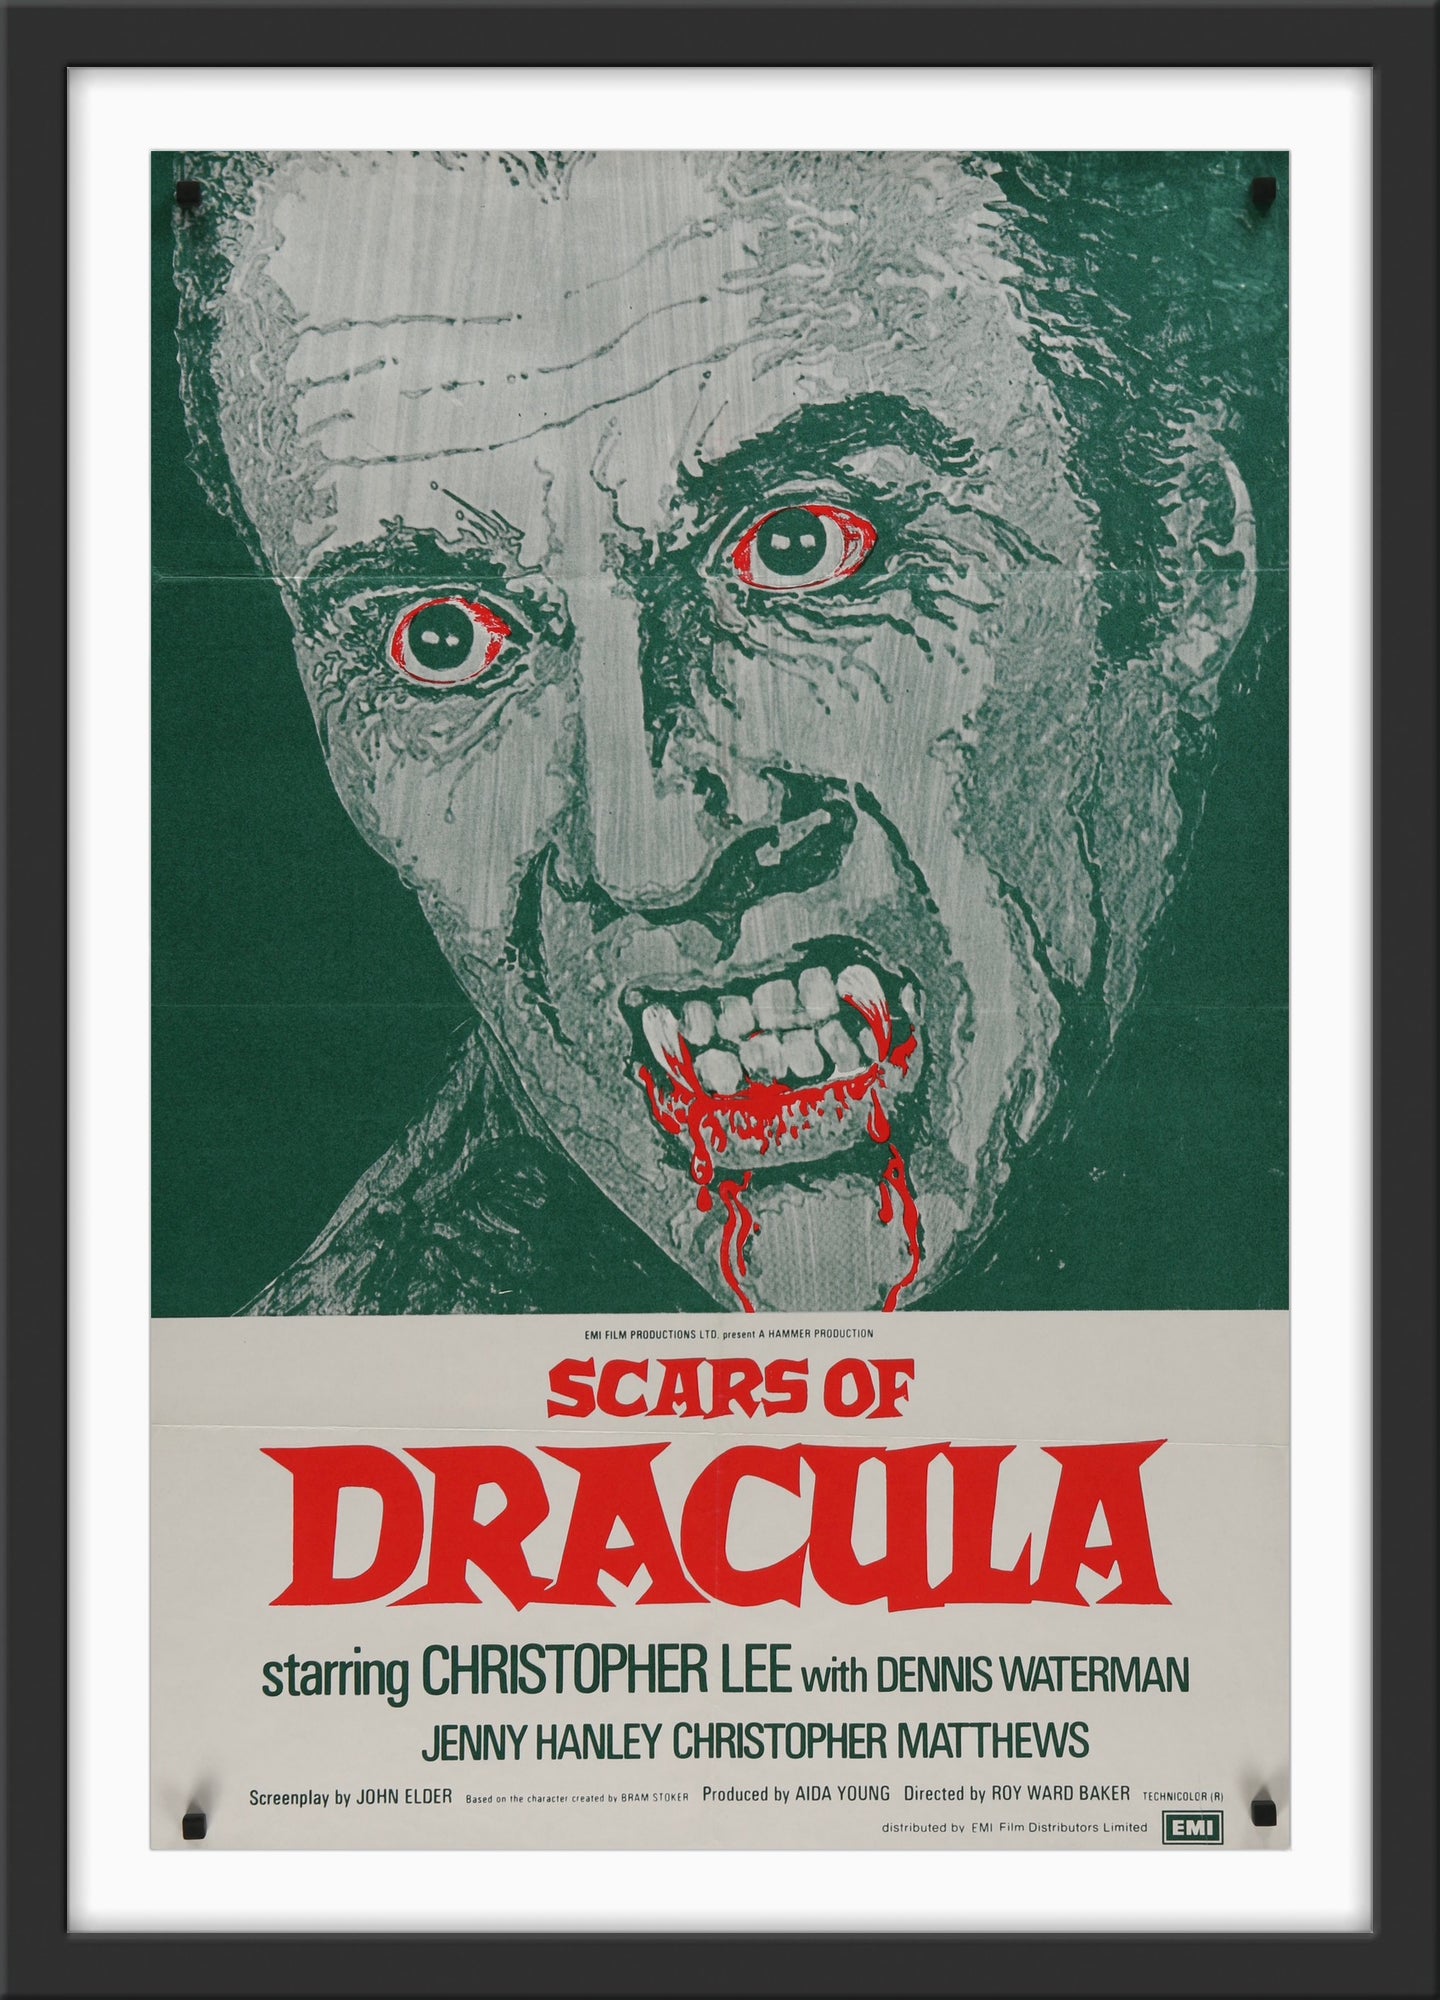 An original movie poster for the Hammer horror film Scars of Dracula